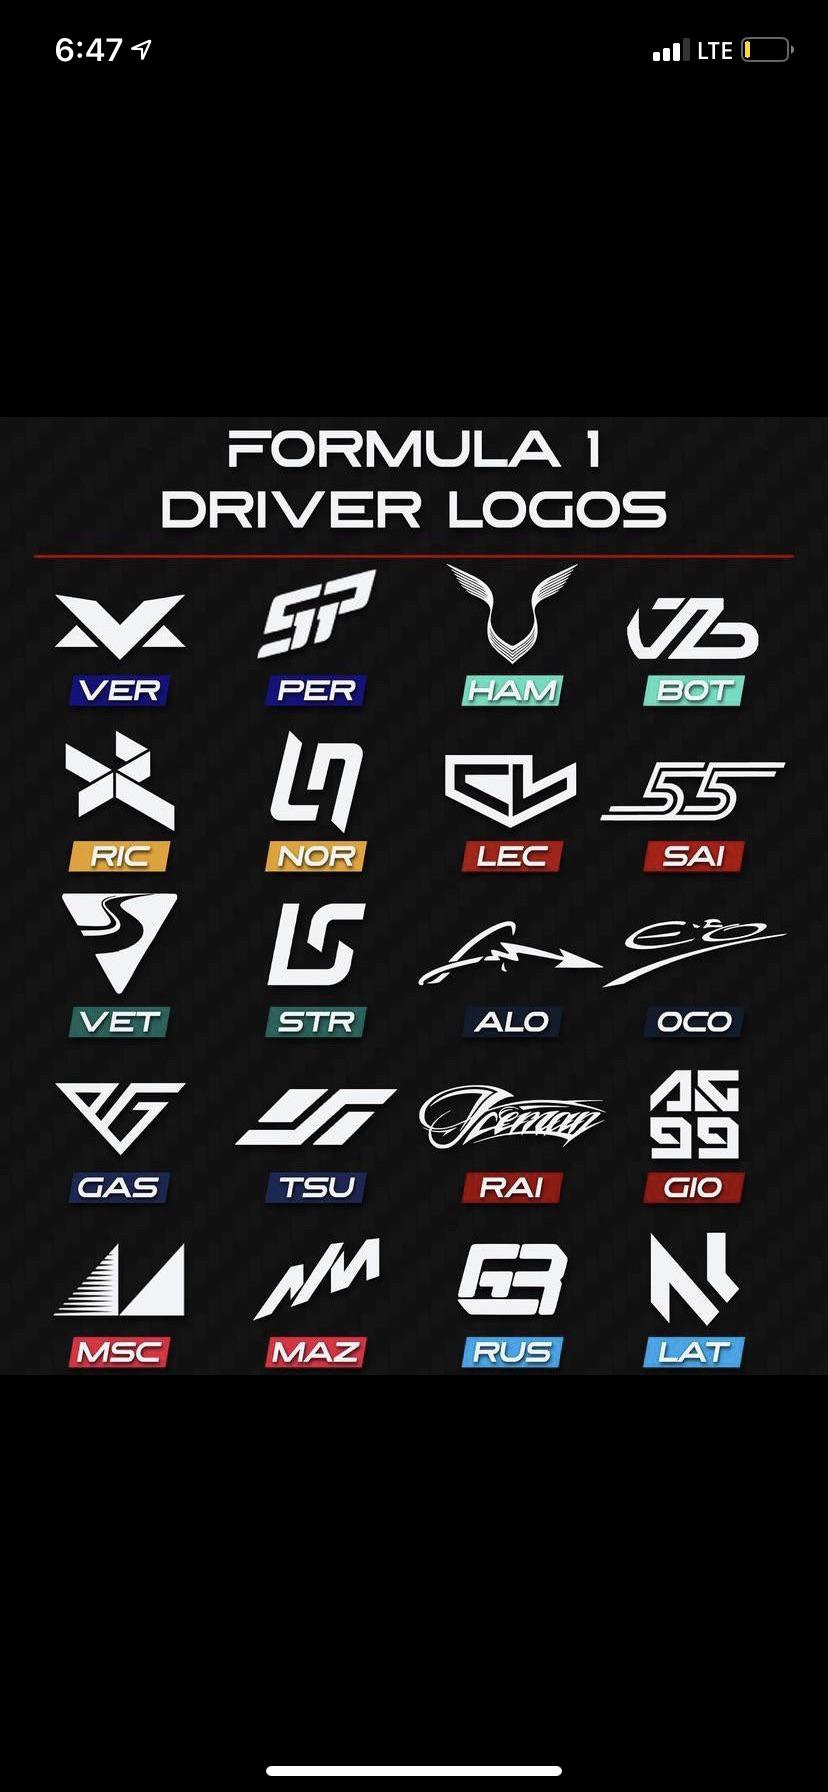 Logos of current F1 drivers Scrolller